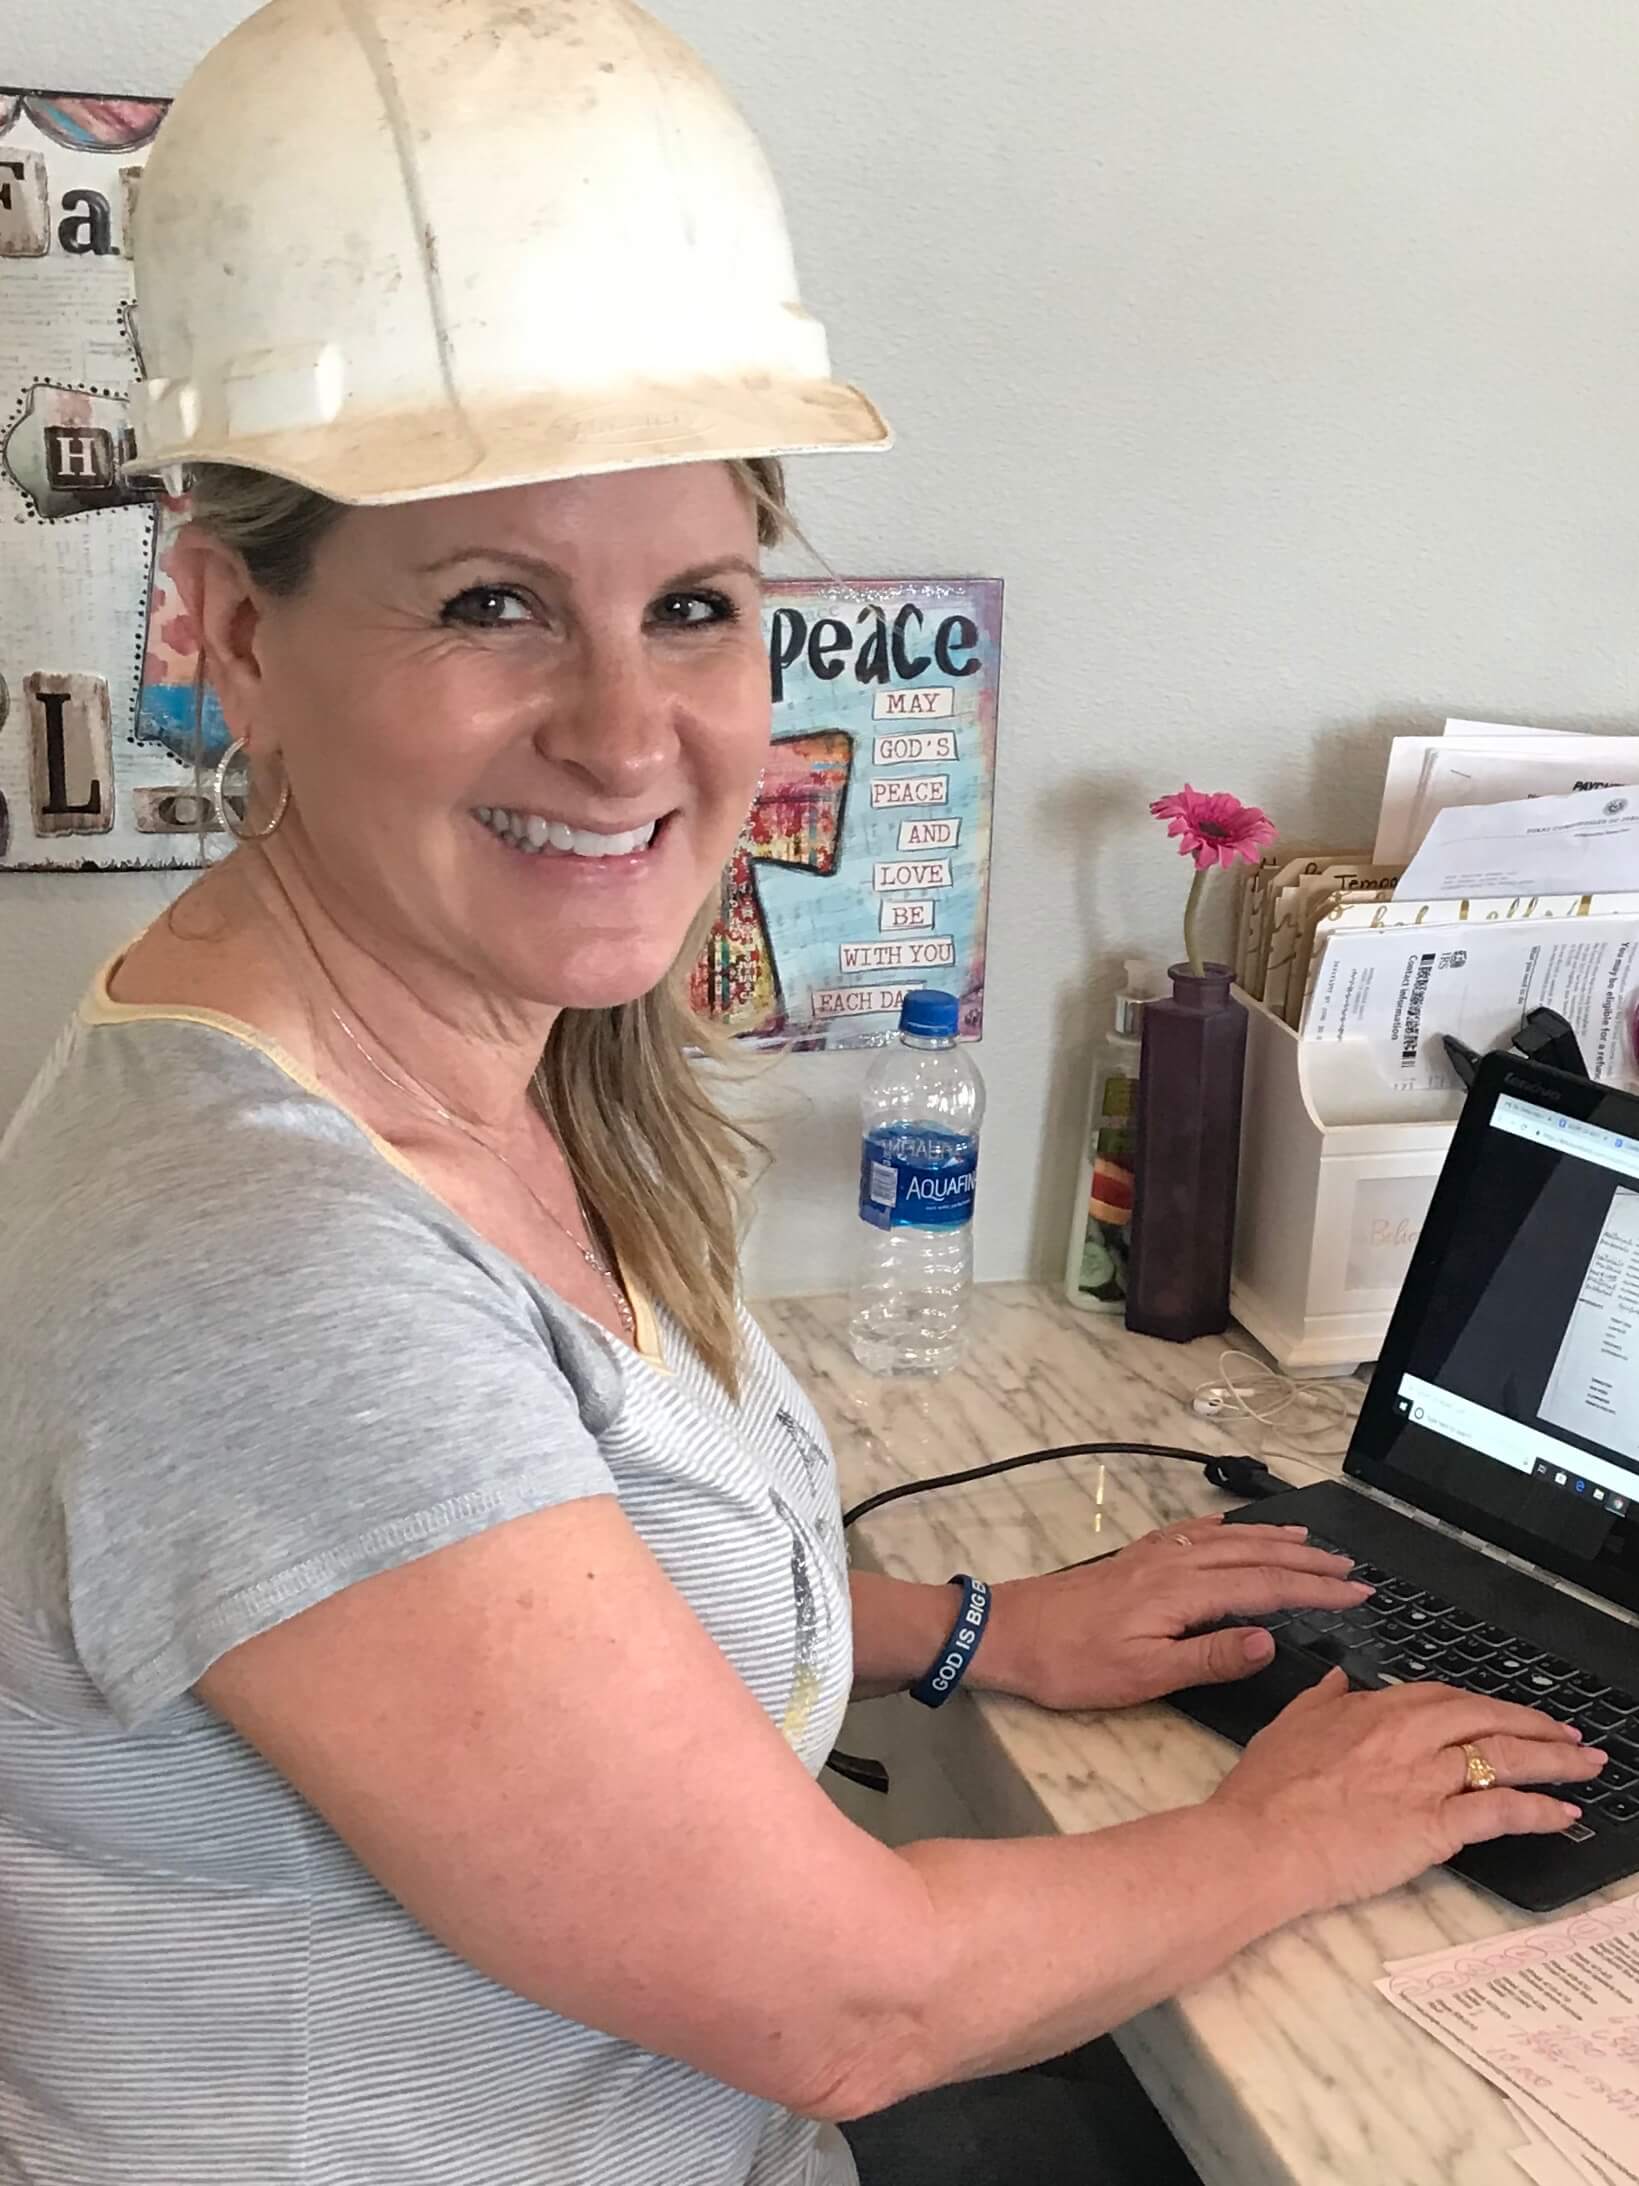 Lynda at her desk working on a computer and wearing a hard hat